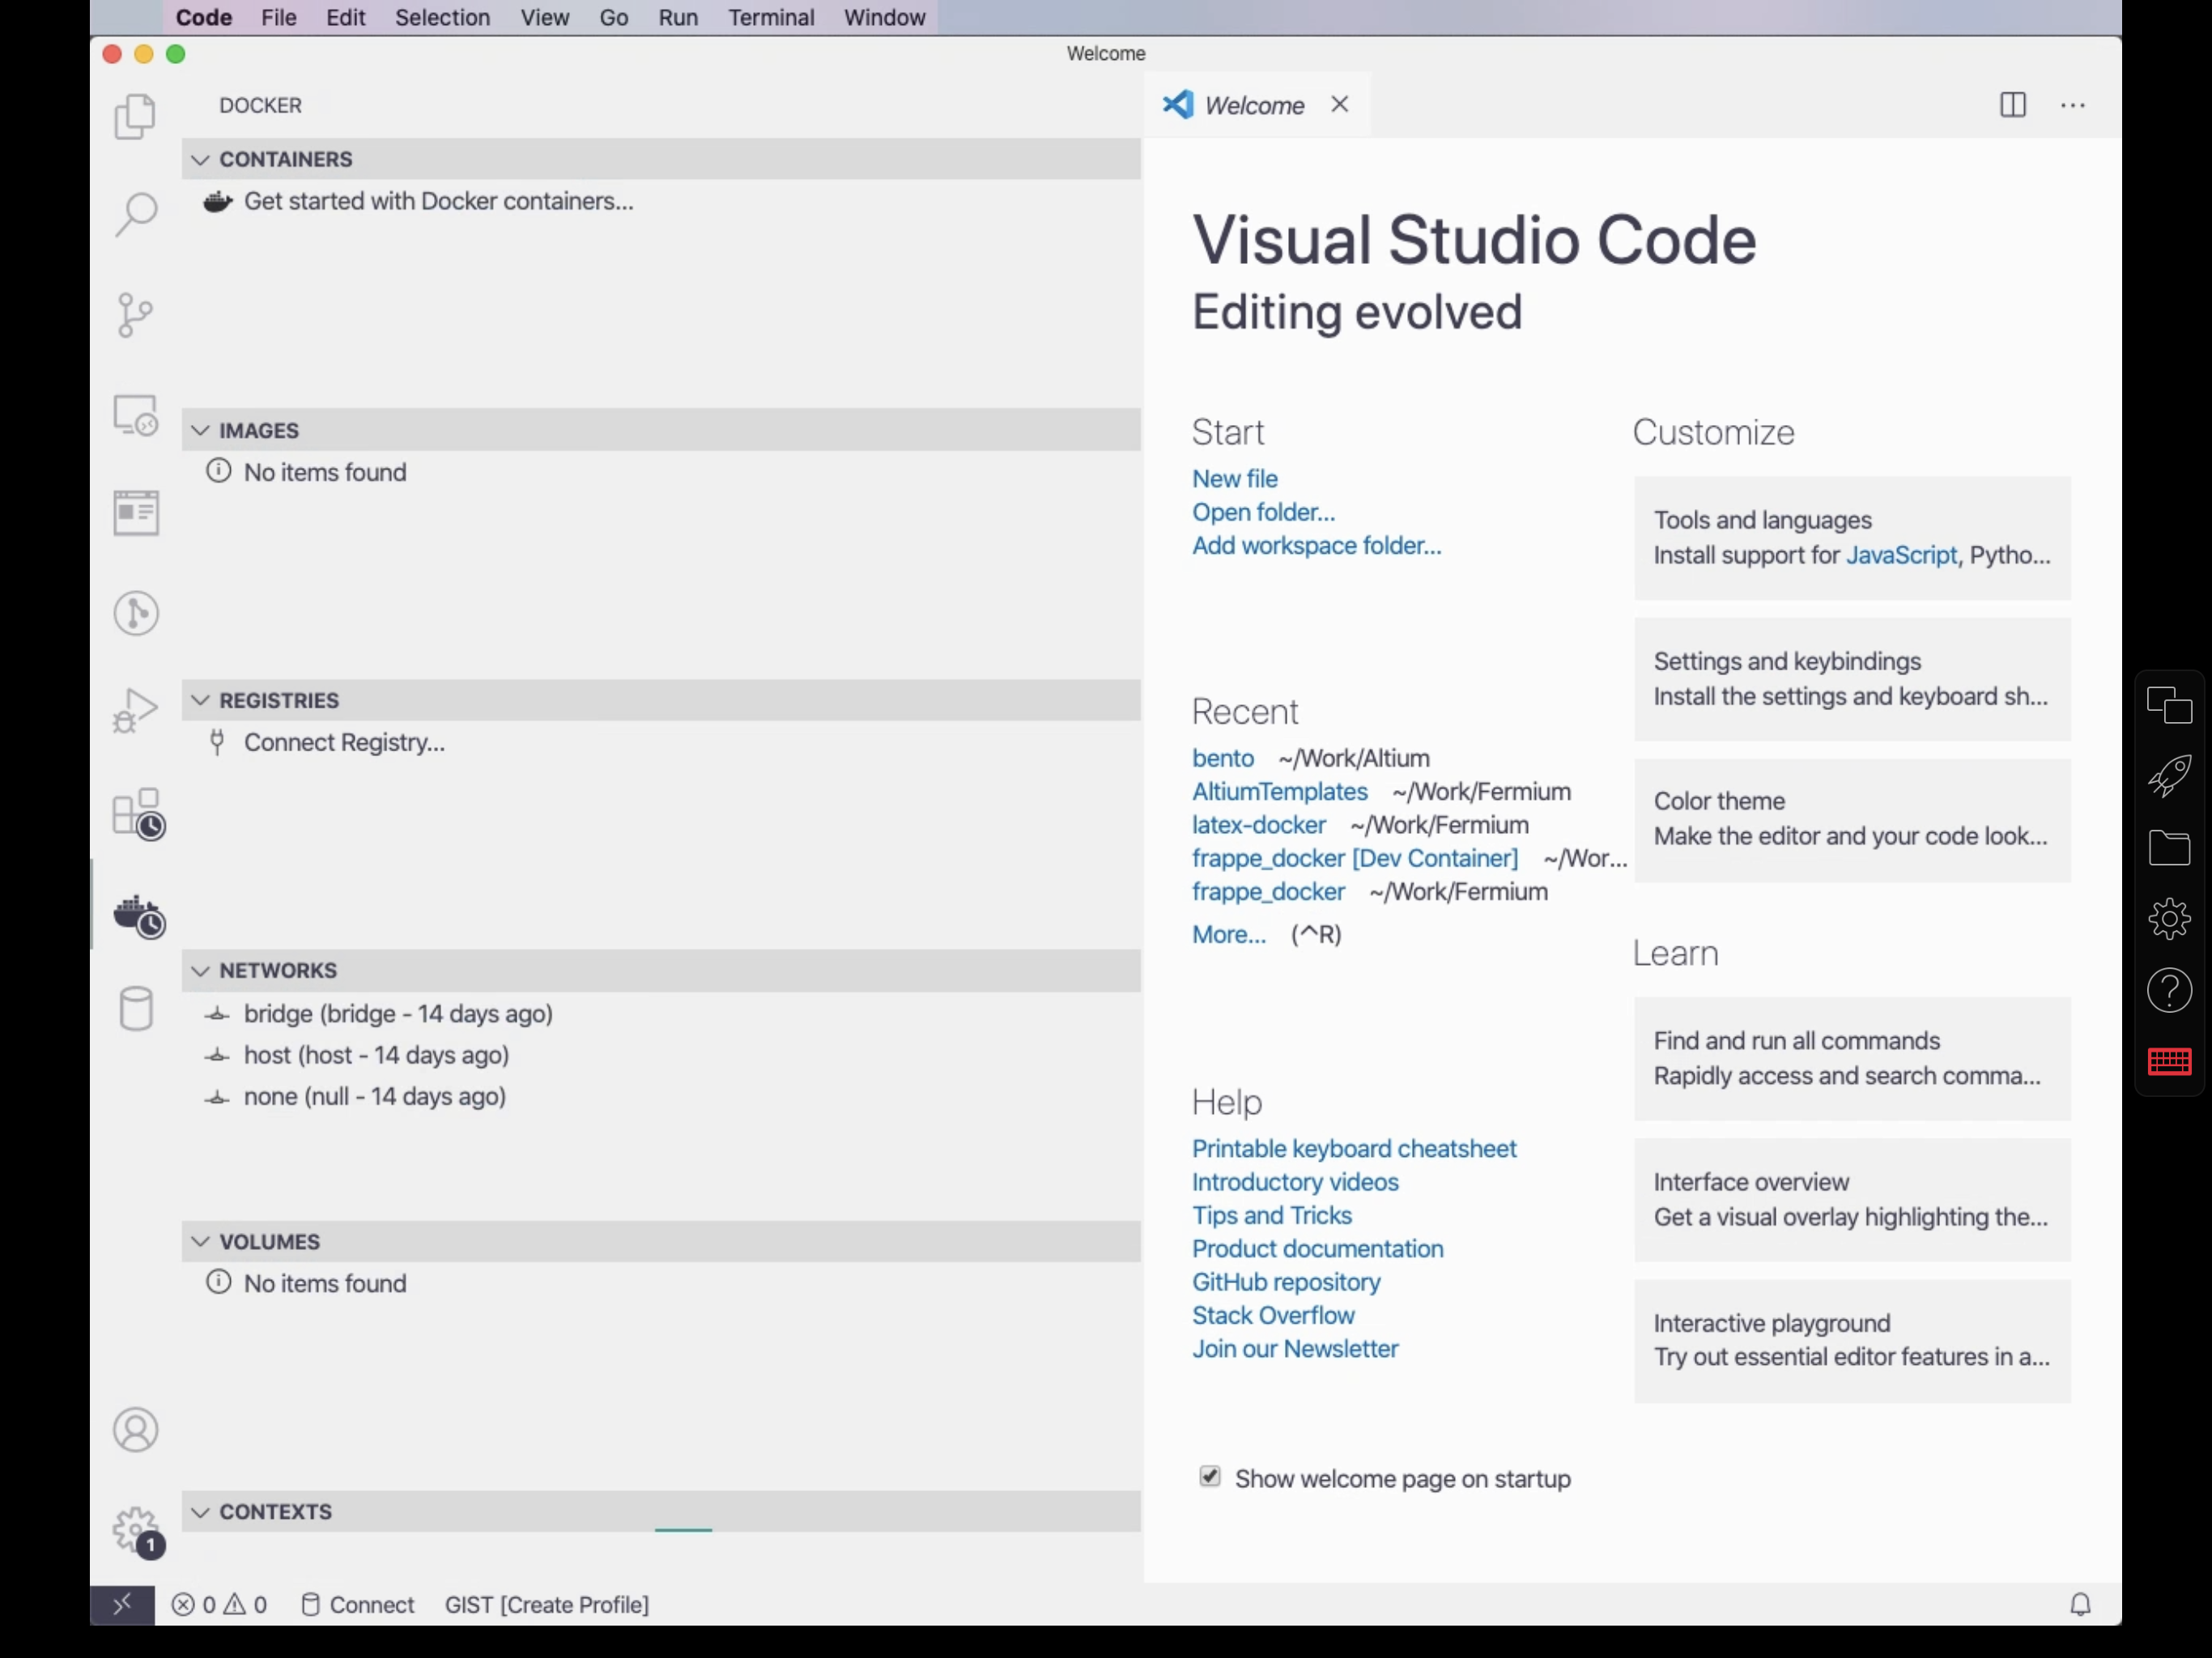 Parallels Access accessing Visual Studio Code from my MacBook Pro at home